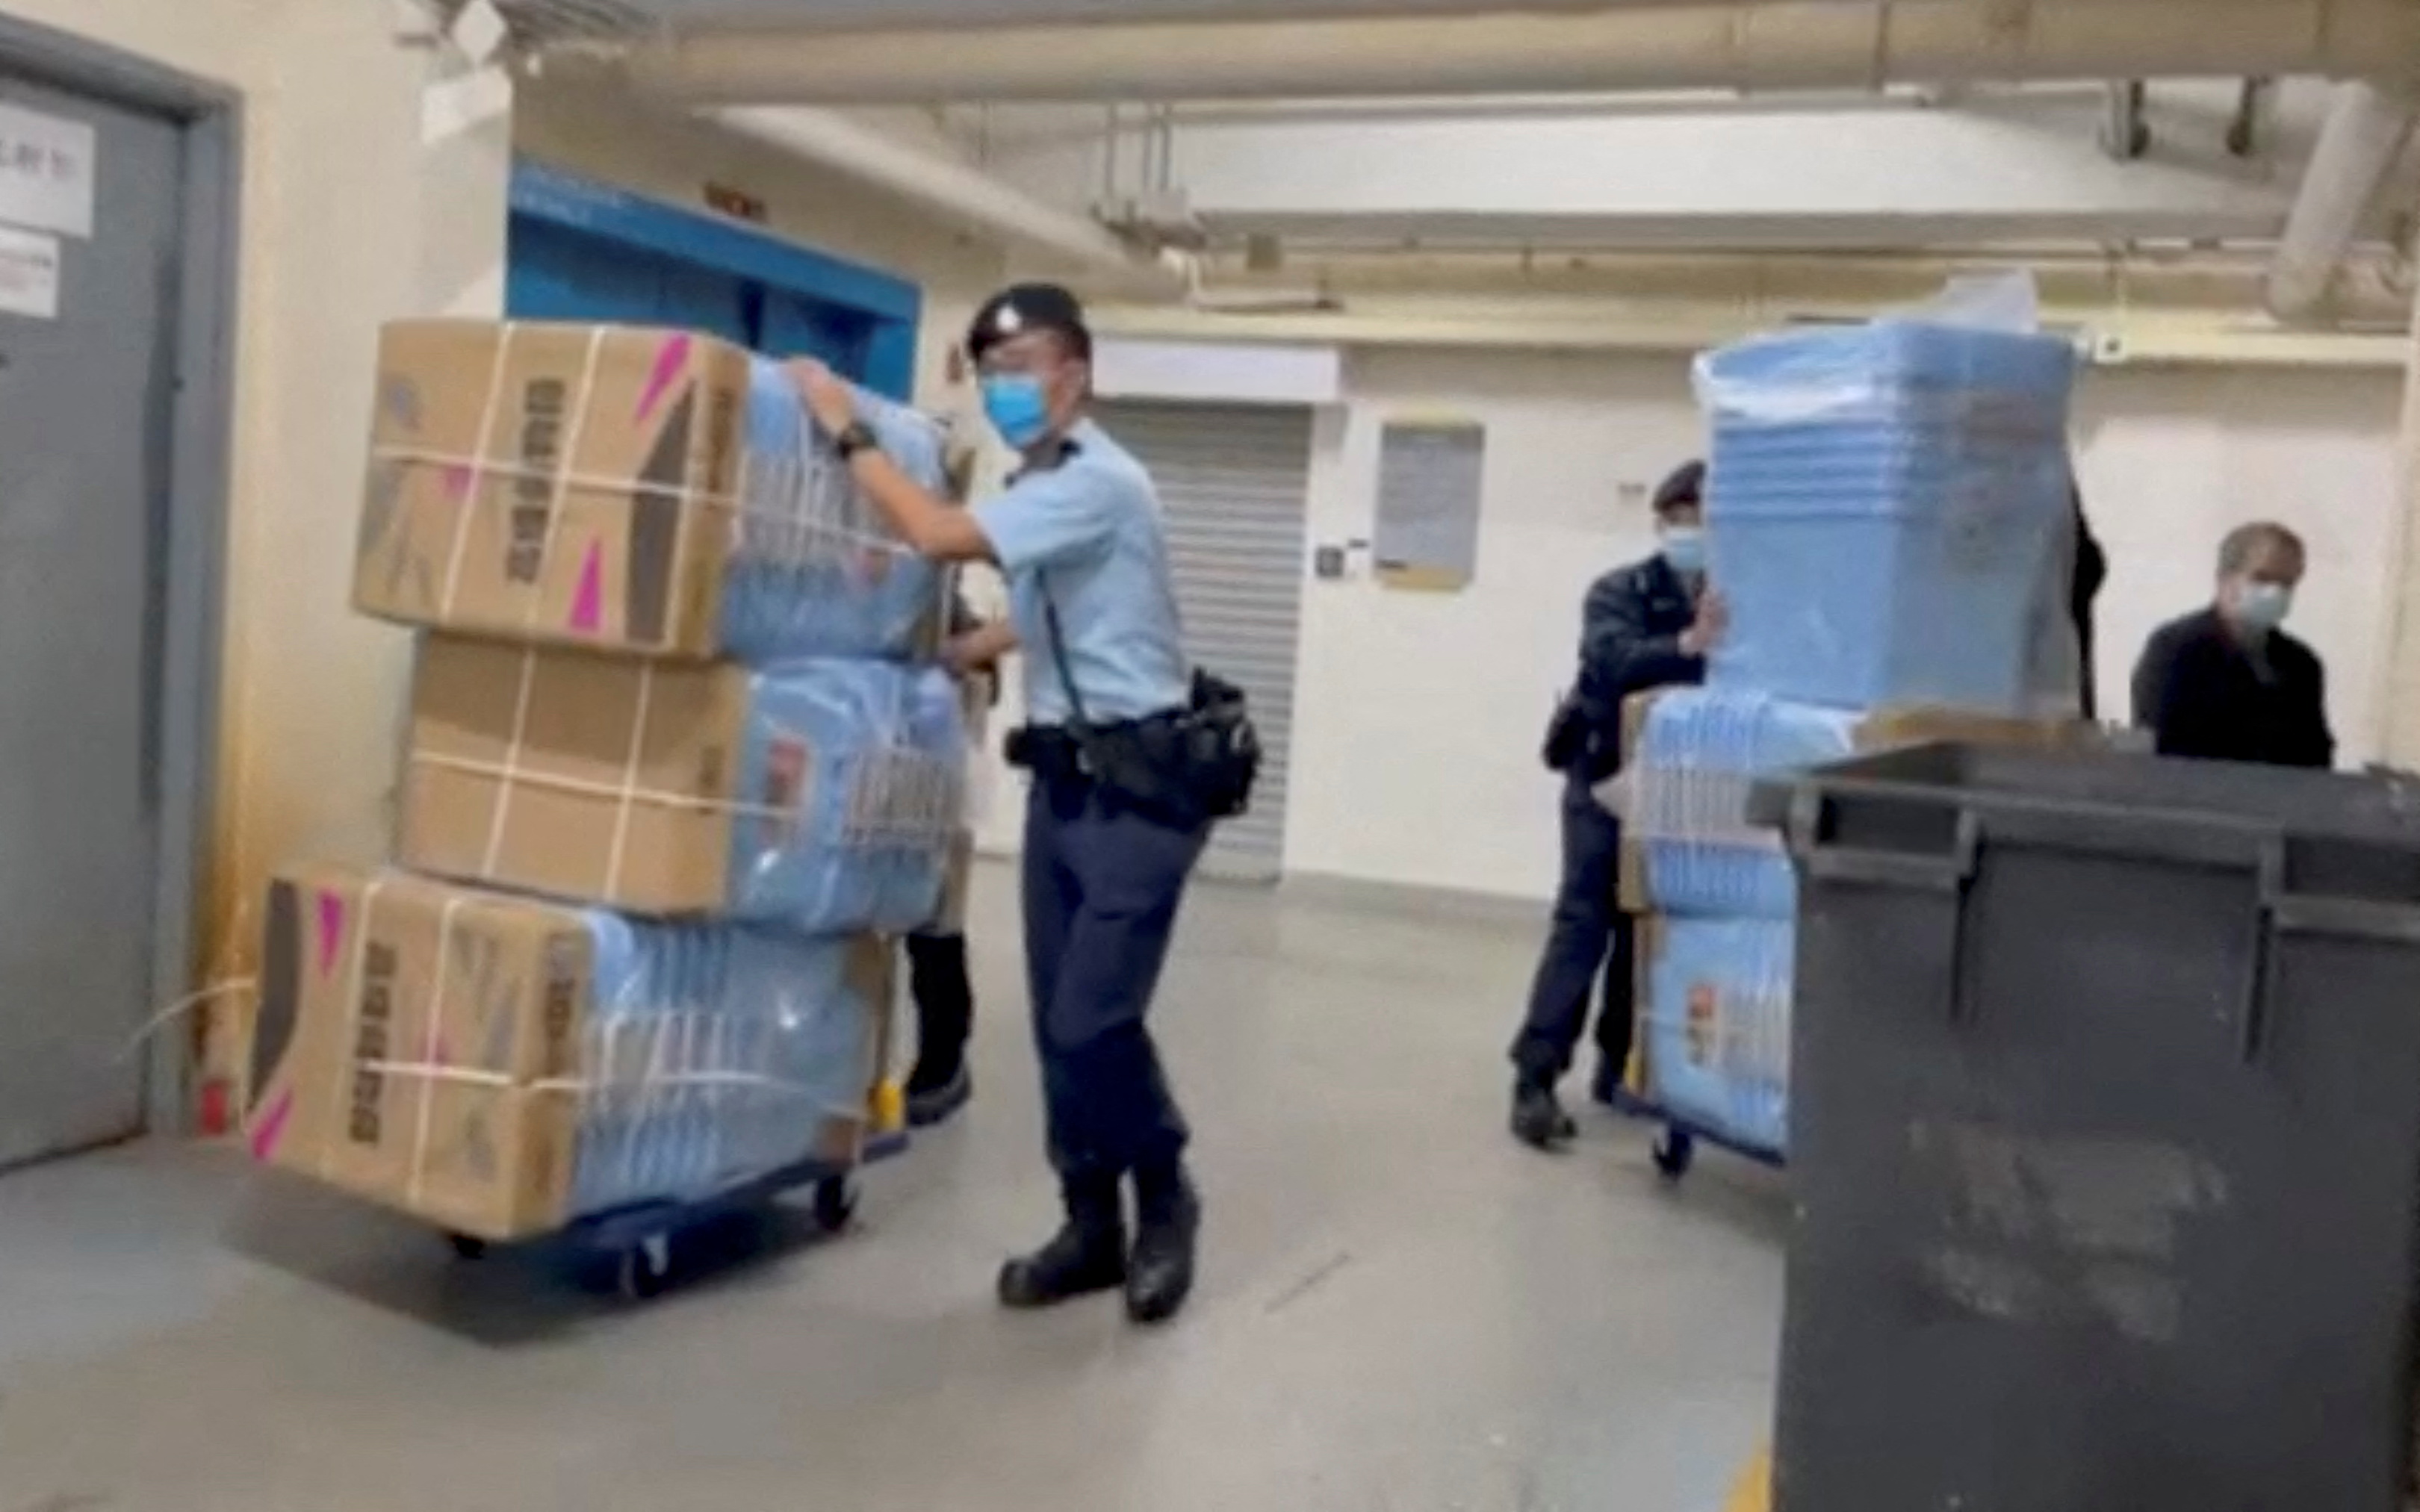 Police officers push boxes to collect evidence during their raid operation at Stand News office in Hong Kong, China